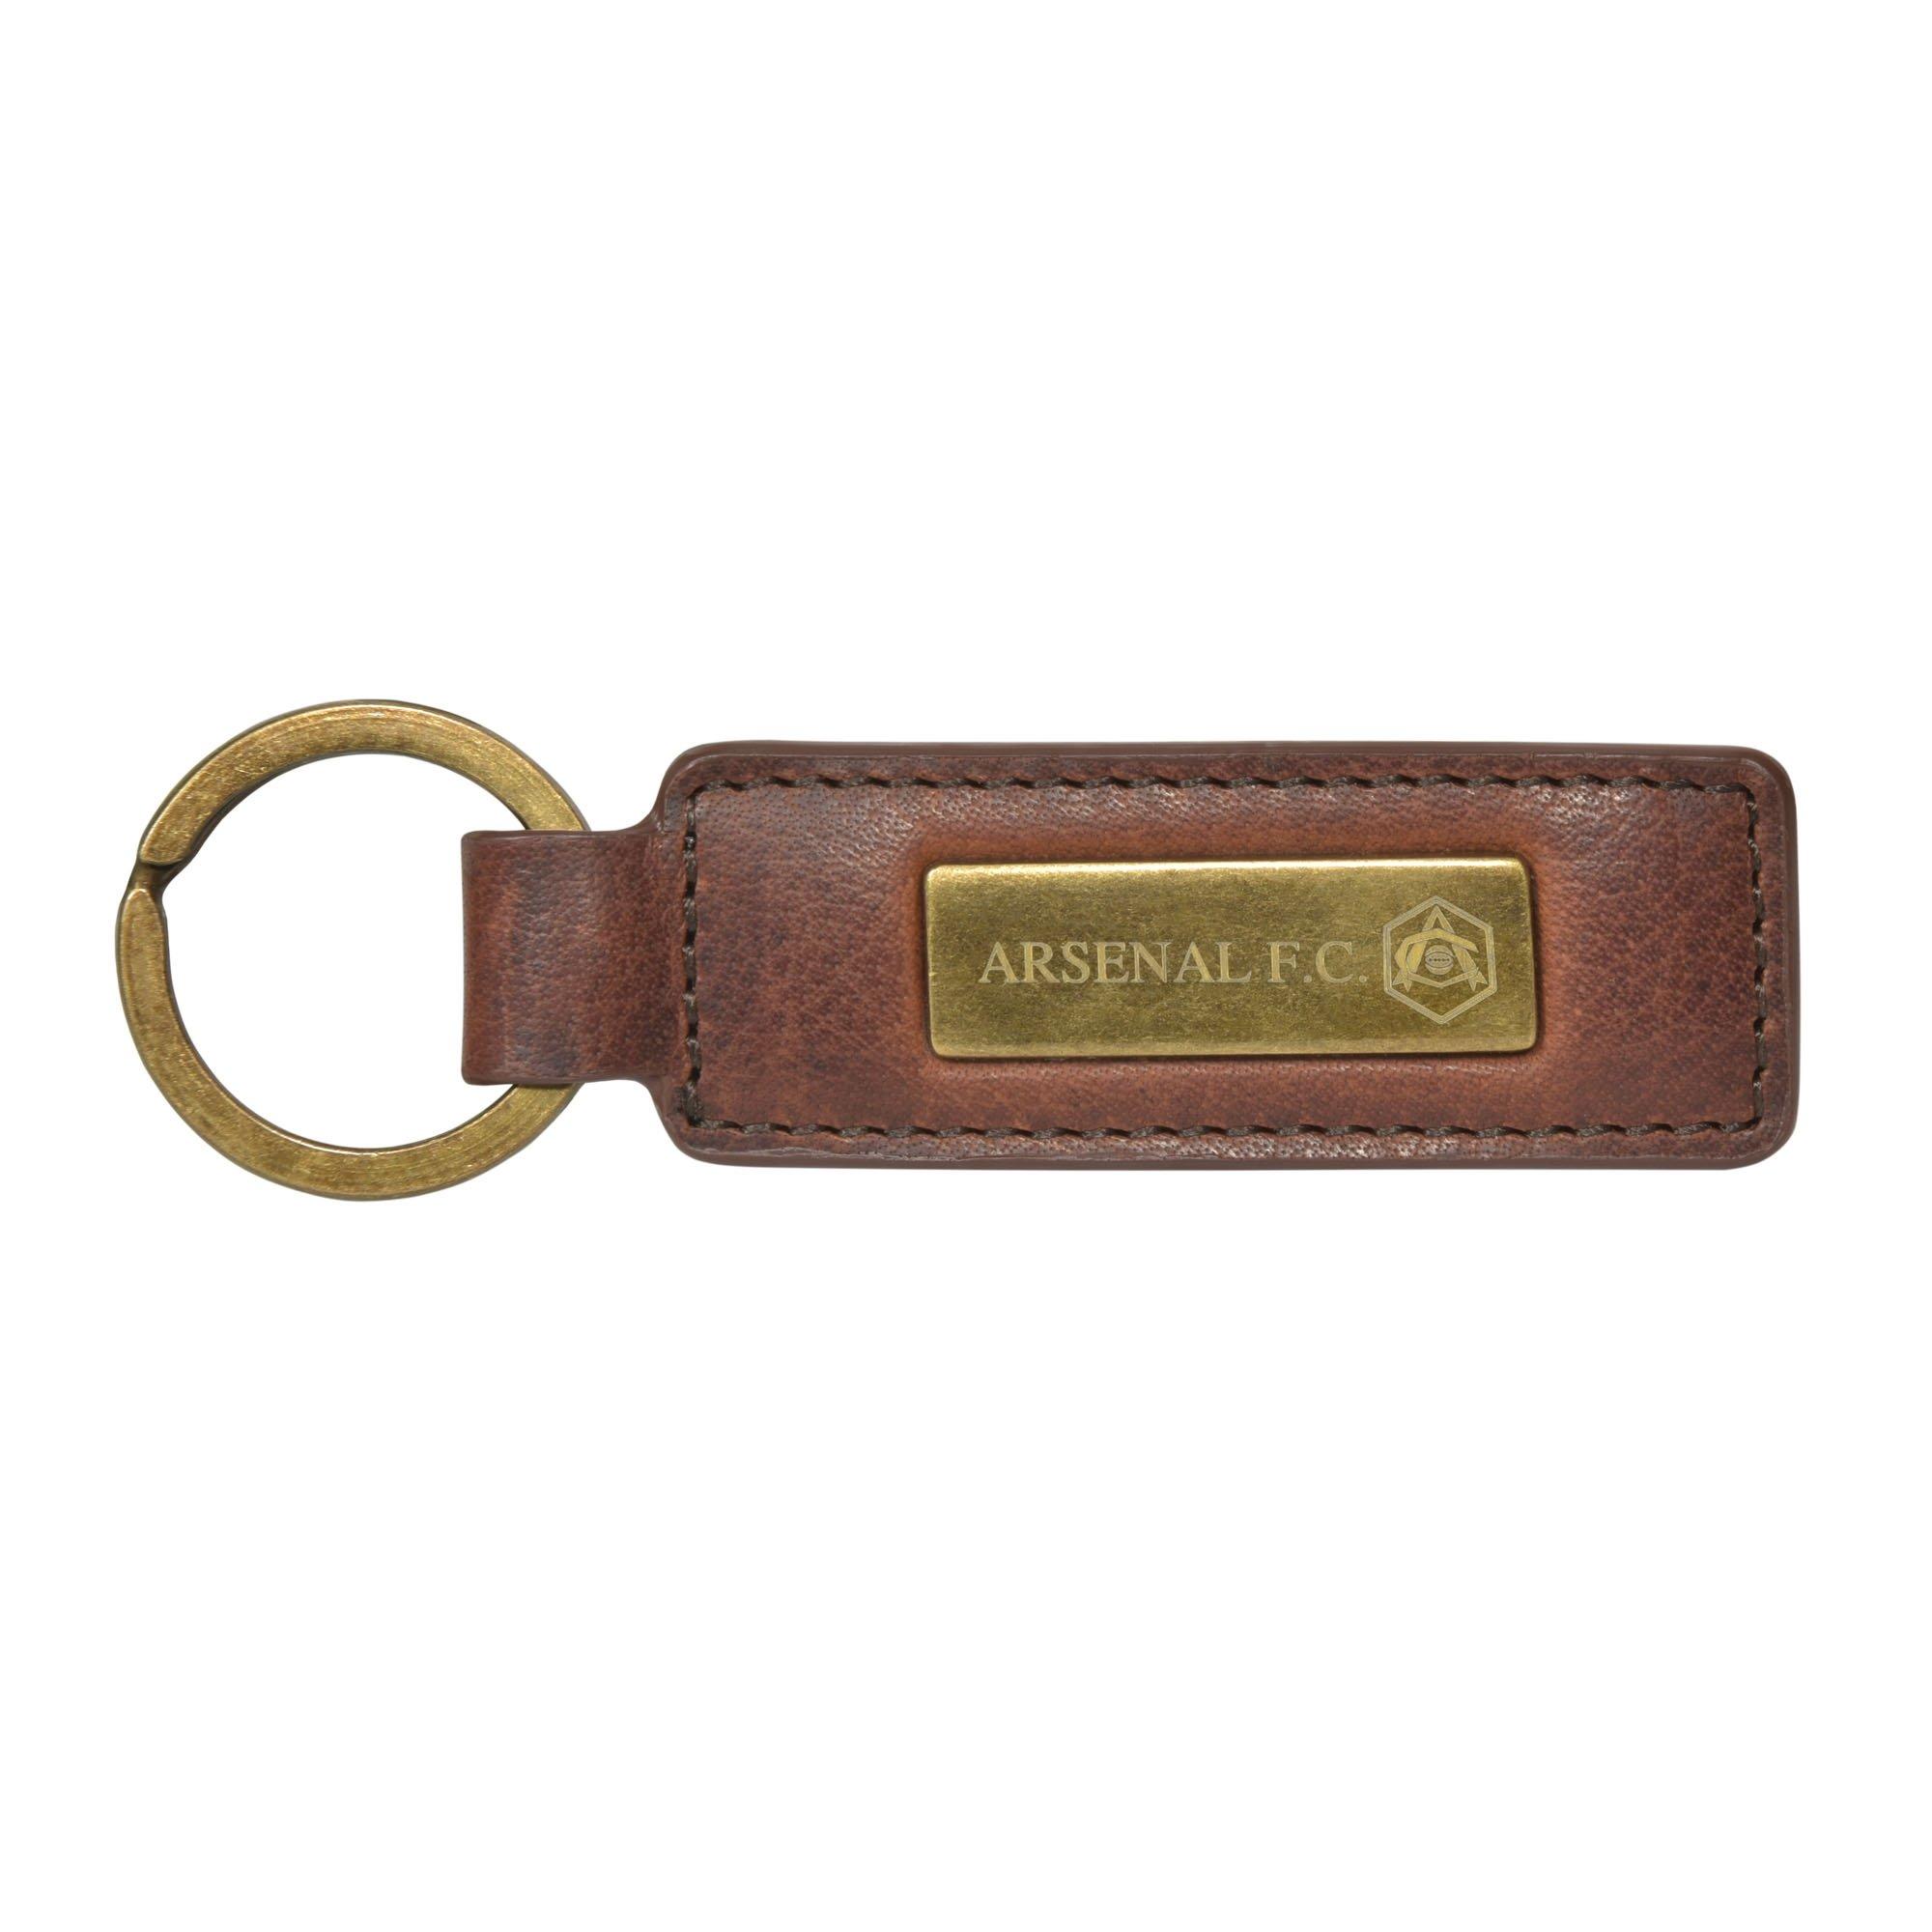 Wide Range of Handmade Personalised Leather Key Rings and Accessories –  Vida Vida Leather Bags & Accessories